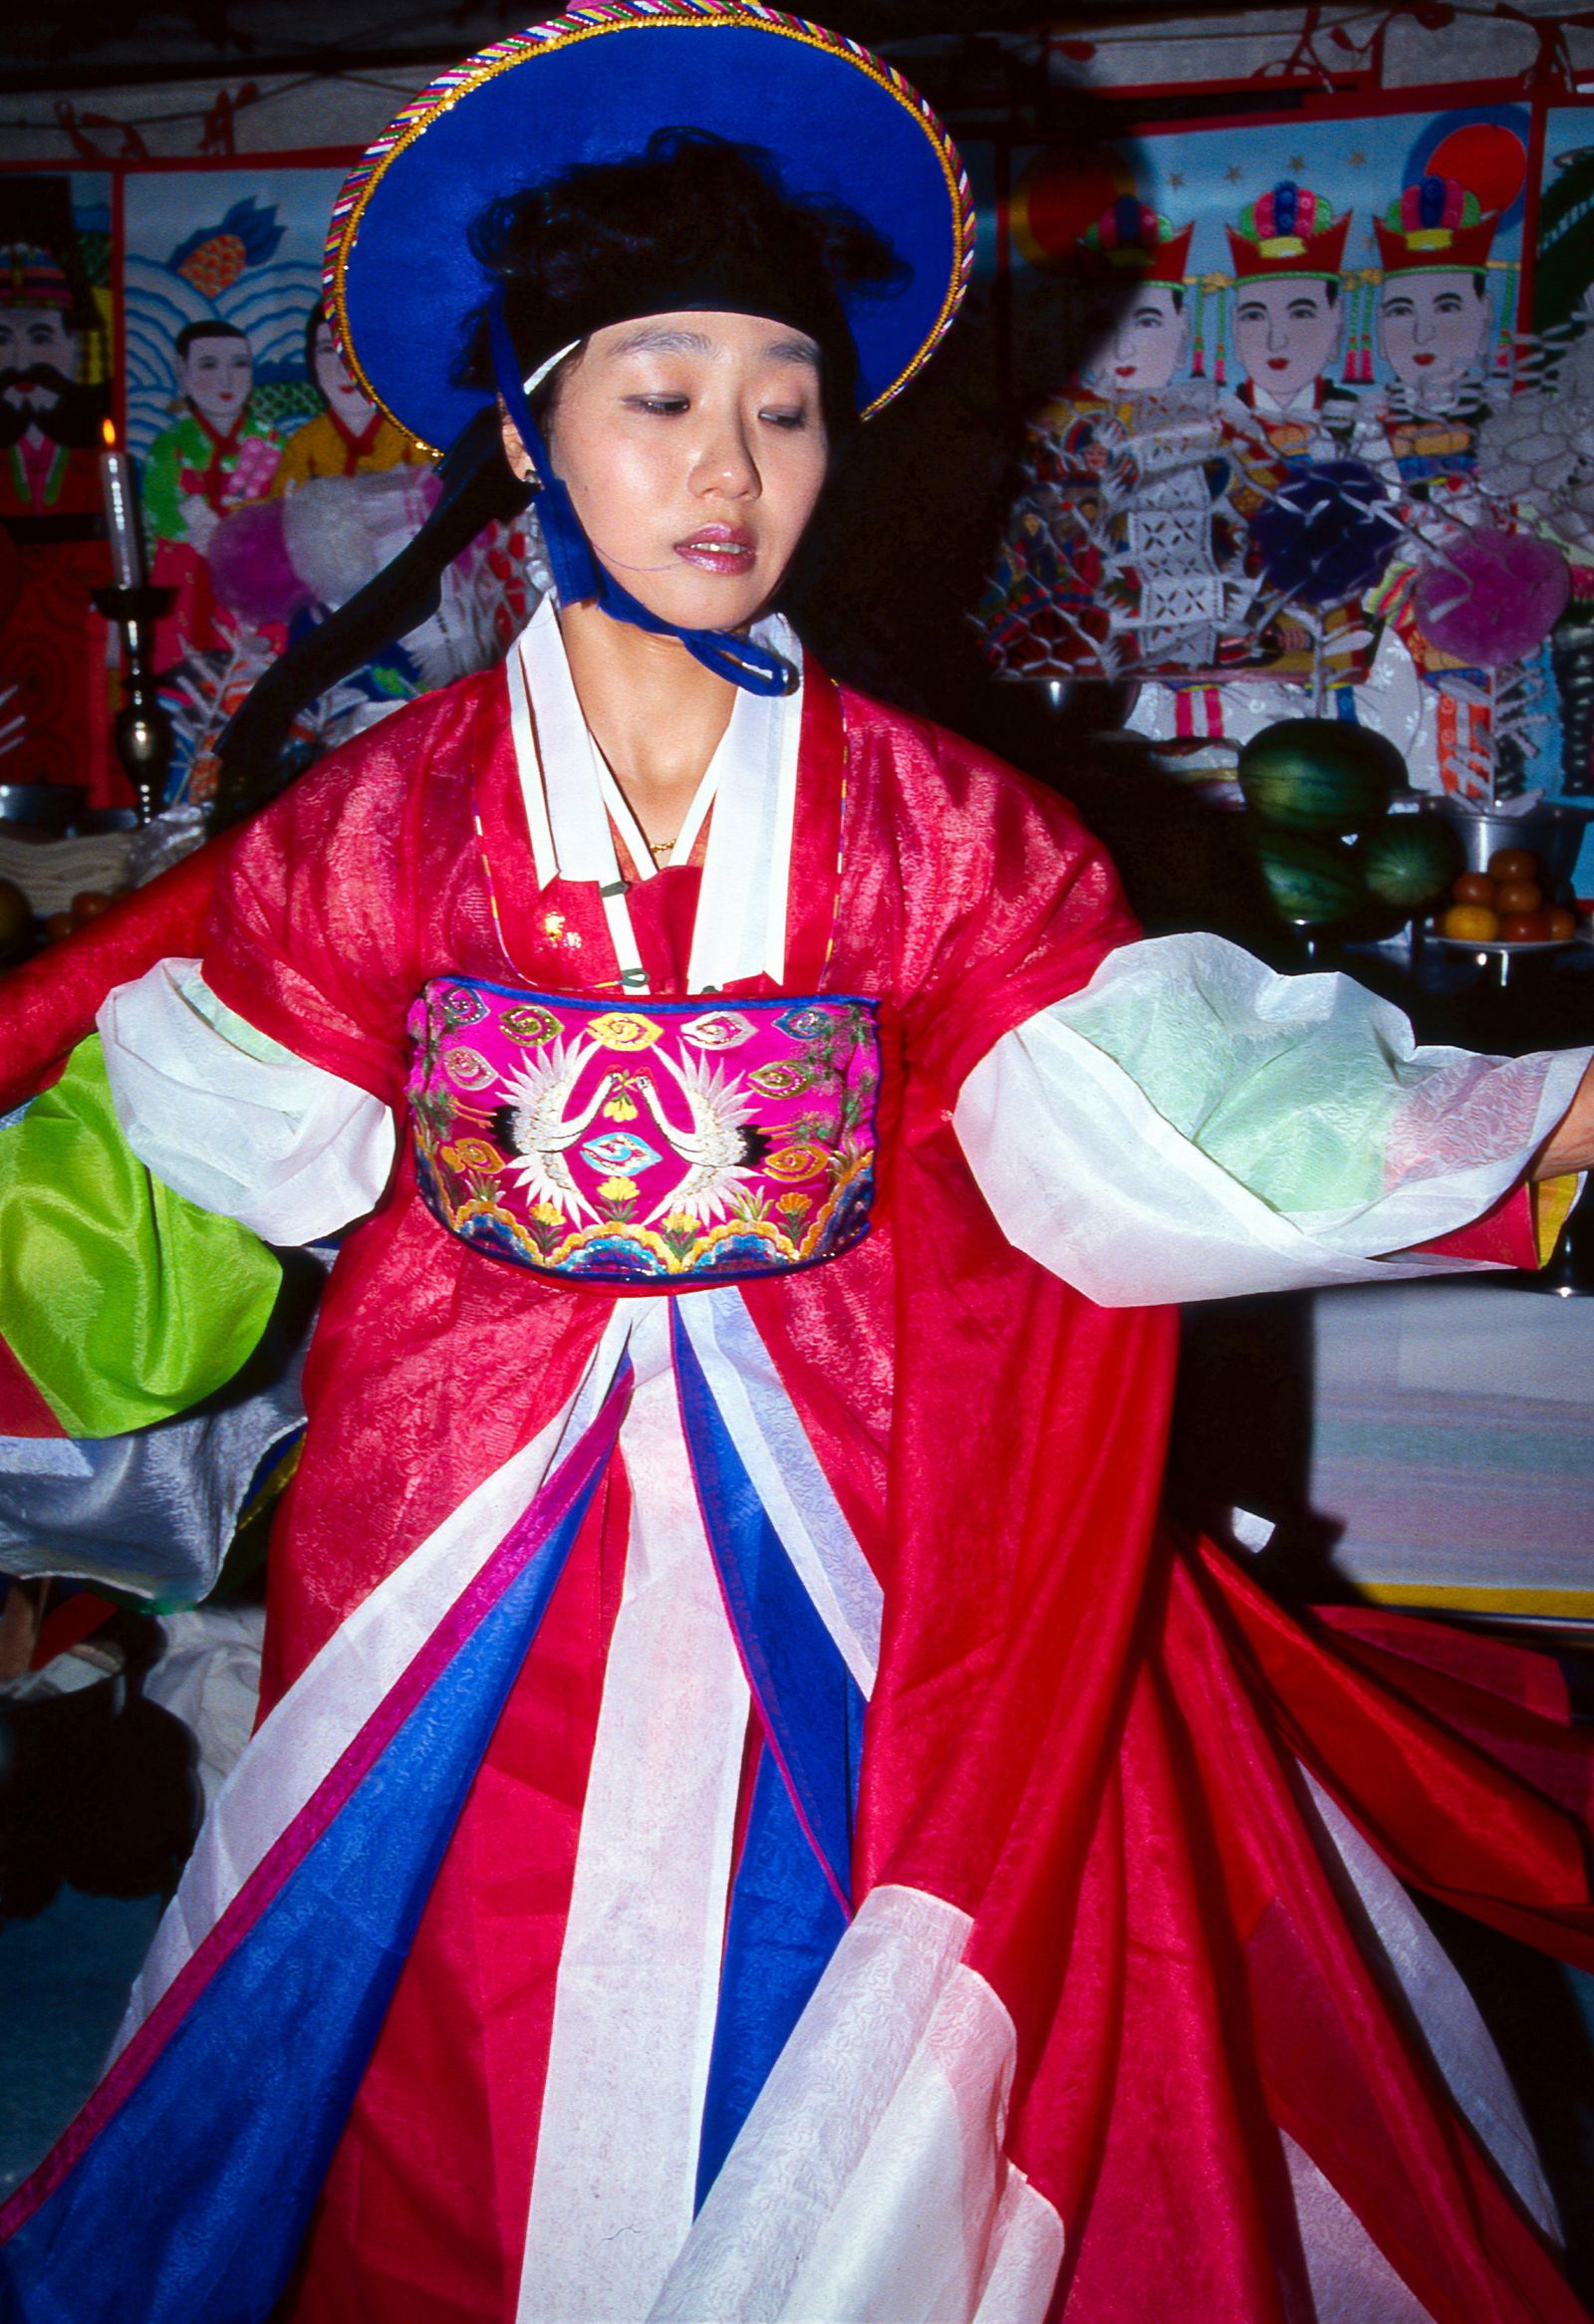 © Hwan Kim - Image from the The origins of human culture - In search of traces of priests and shamans... photography project